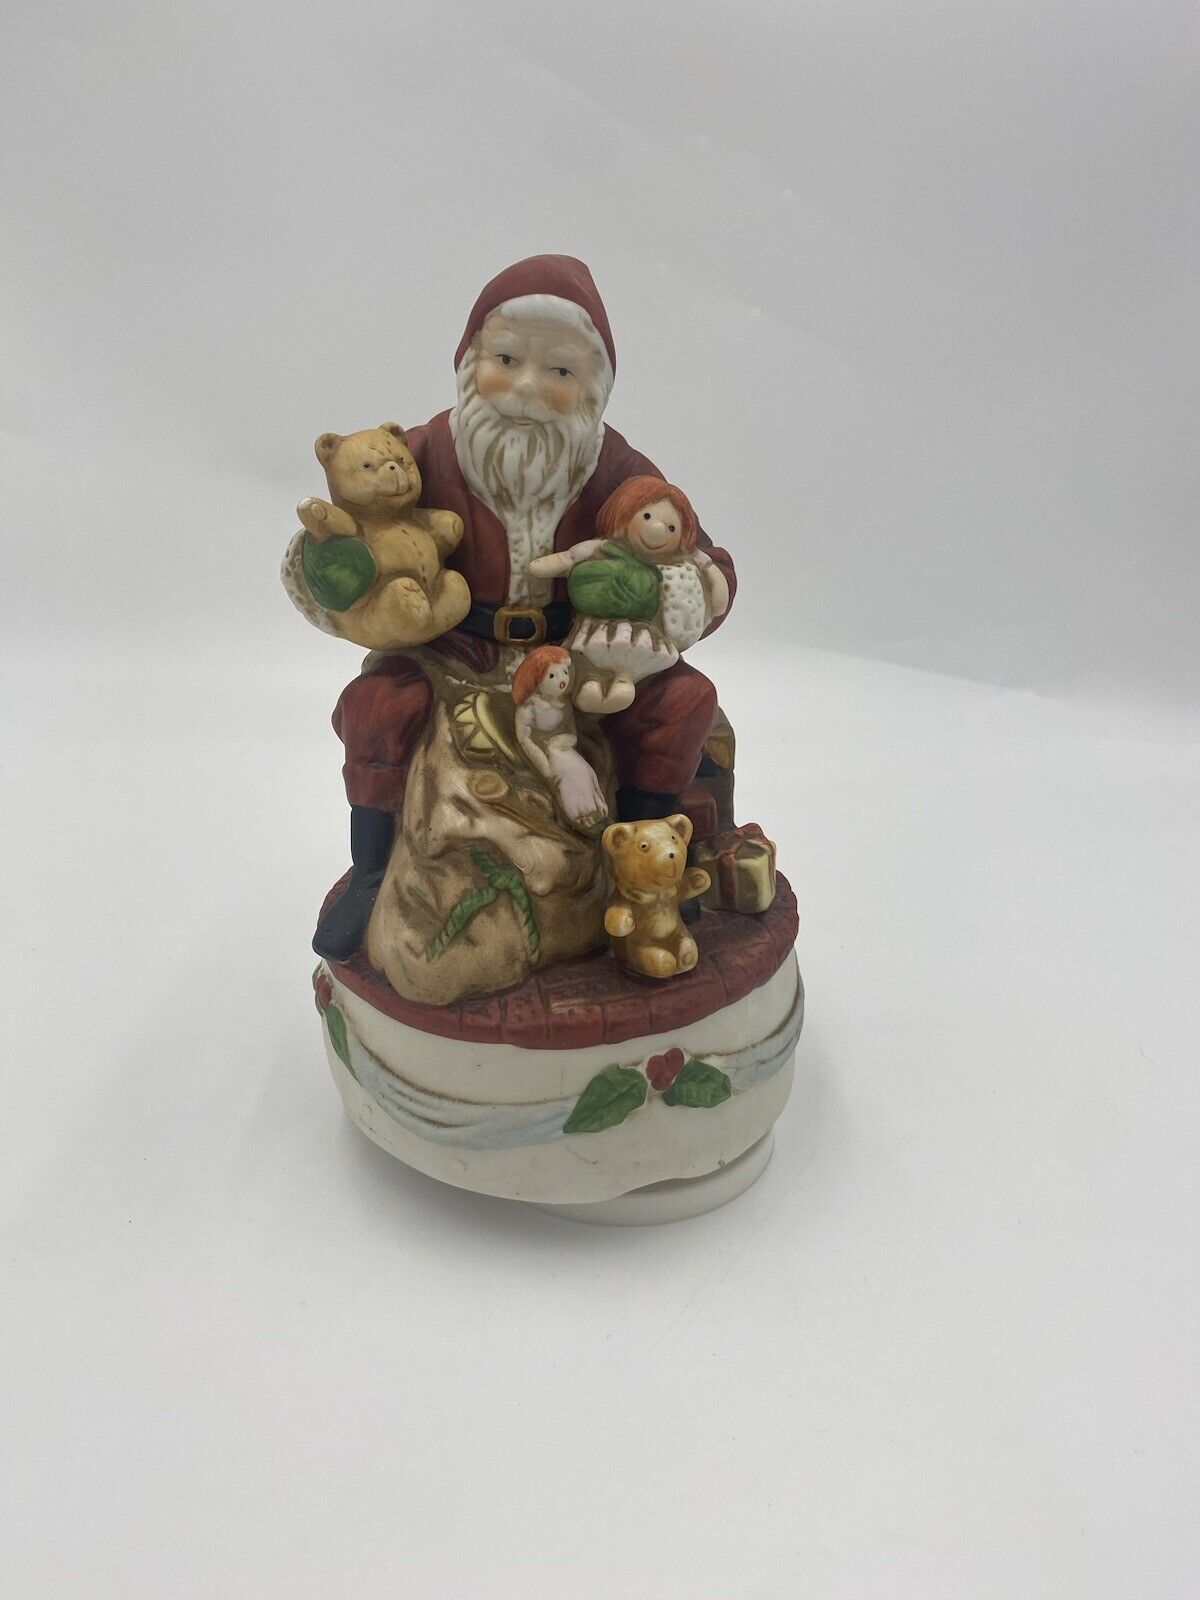 Homco Santa Claus Music Box Bisque Figurine Vintage 80s  Tested Working No Chips